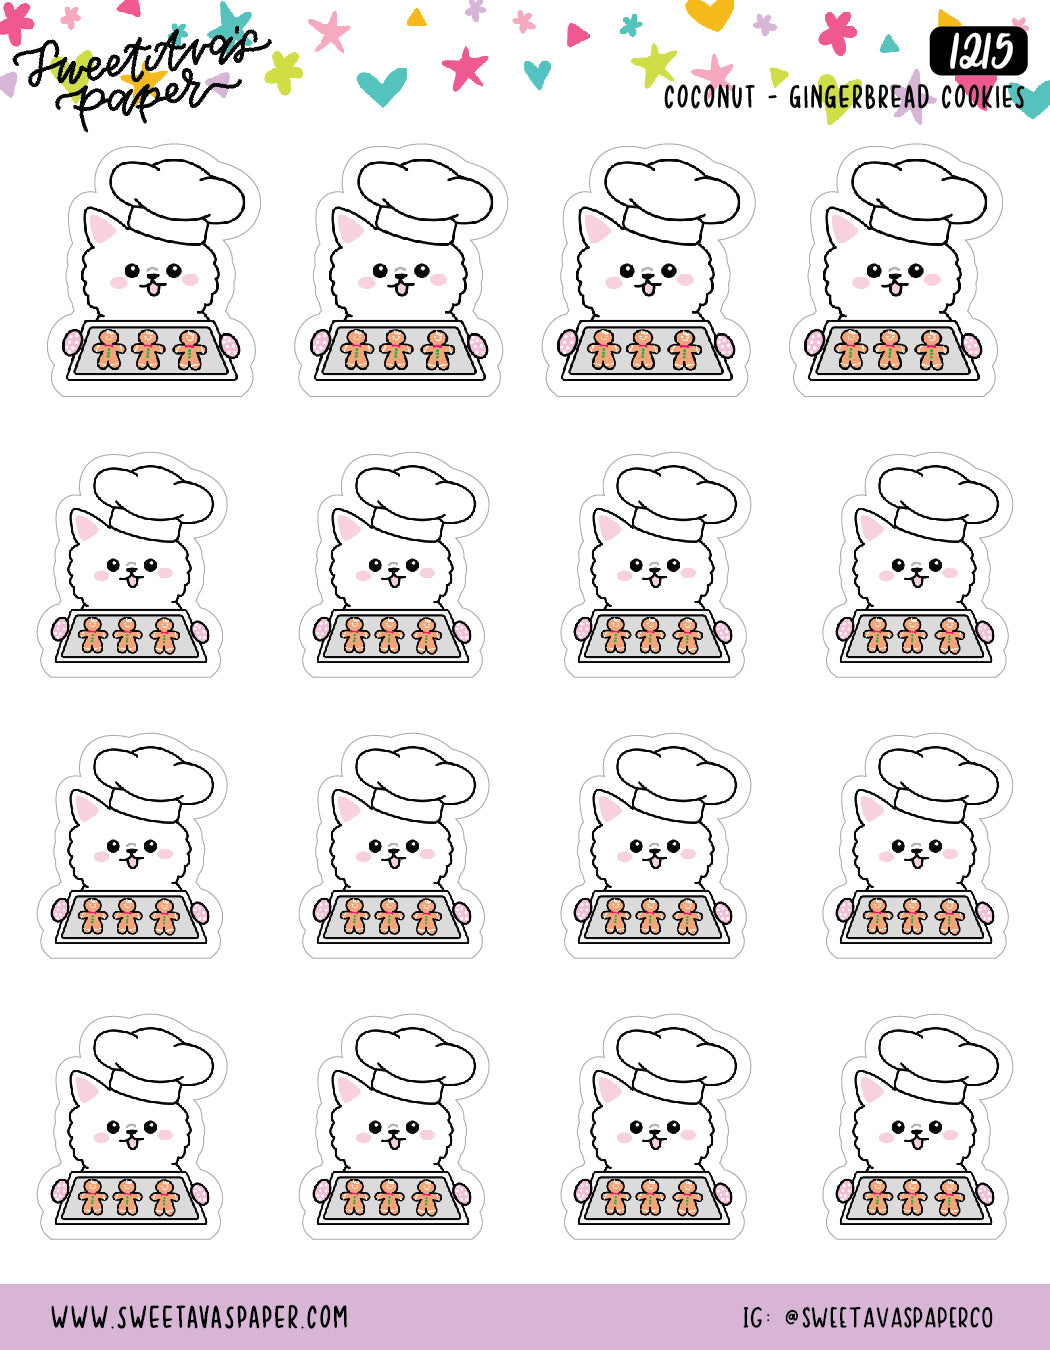 Baking Cookies Planner Stickers - Coconut the Puppy [1215]